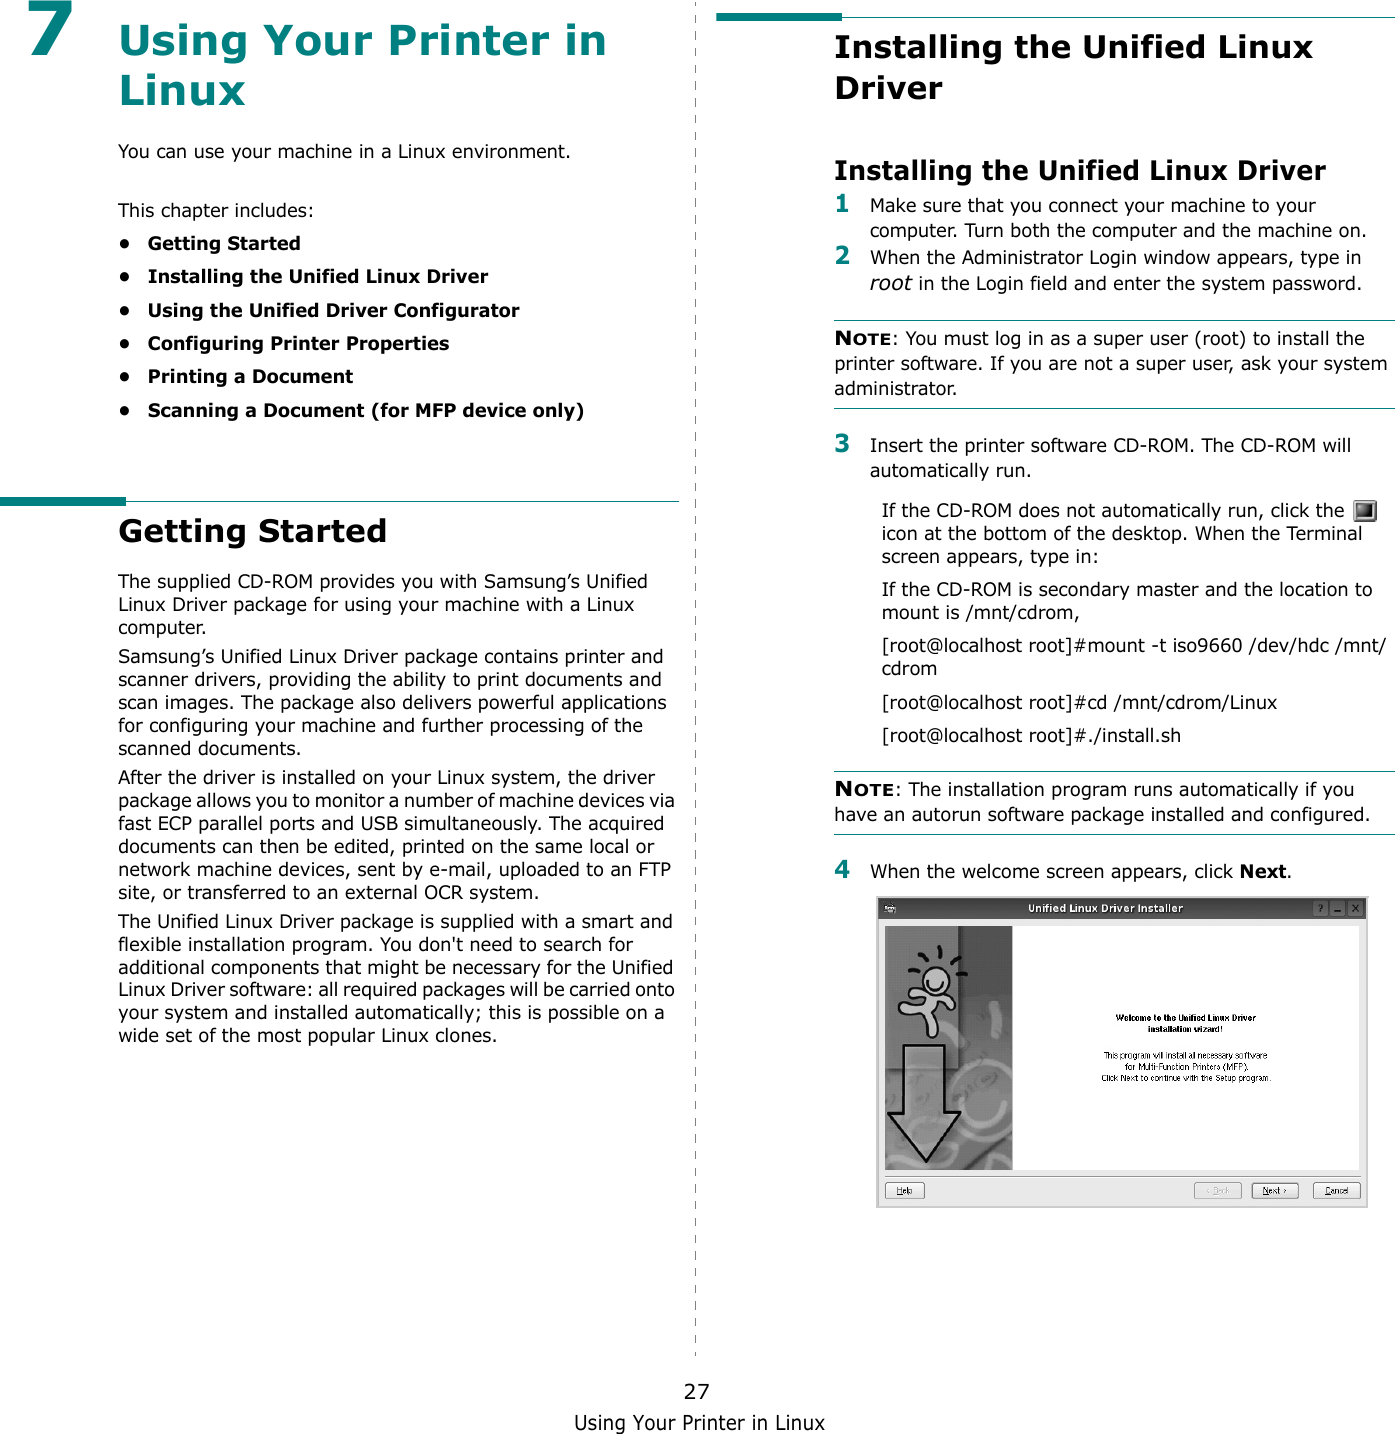 Using Your Printer in Linux277Using Your Printer in Linux You can use your machine in a Linux environment. This chapter includes:• Getting Started• Installing the Unified Linux Driver• Using the Unified Driver Configurator• Configuring Printer Properties• Printing a Document• Scanning a Document (for MFP device only)Getting StartedThe supplied CD-ROM provides you with Samsung’s Unified Linux Driver package for using your machine with a Linux computer.Samsung’s Unified Linux Driver package contains printer and scanner drivers, providing the ability to print documents and scan images. The package also delivers powerful applications for configuring your machine and further processing of the scanned documents.After the driver is installed on your Linux system, the driver package allows you to monitor a number of machine devices via fast ECP parallel ports and USB simultaneously. The acquired documents can then be edited, printed on the same local or network machine devices, sent by e-mail, uploaded to an FTP site, or transferred to an external OCR system.The Unified Linux Driver package is supplied with a smart and flexible installation program. You don&apos;t need to search for additional components that might be necessary for the Unified Linux Driver software: all required packages will be carried onto your system and installed automatically; this is possible on a wide set of the most popular Linux clones.Installing the Unified Linux DriverInstalling the Unified Linux Driver1Make sure that you connect your machine to your computer. Turn both the computer and the machine on.2When the Administrator Login window appears, type in root in the Login field and enter the system password.NOTE: You must log in as a super user (root) to install the printer software. If you are not a super user, ask your system administrator.3Insert the printer software CD-ROM. The CD-ROM will automatically run.If the CD-ROM does not automatically run, click the   icon at the bottom of the desktop. When the Terminal screen appears, type in:If the CD-ROM is secondary master and the location to mount is /mnt/cdrom,[root@localhost root]#mount -t iso9660 /dev/hdc /mnt/cdrom[root@localhost root]#cd /mnt/cdrom/Linux[root@localhost root]#./install.sh NOTE: The installation program runs automatically if you have an autorun software package installed and configured.4When the welcome screen appears, click Next.